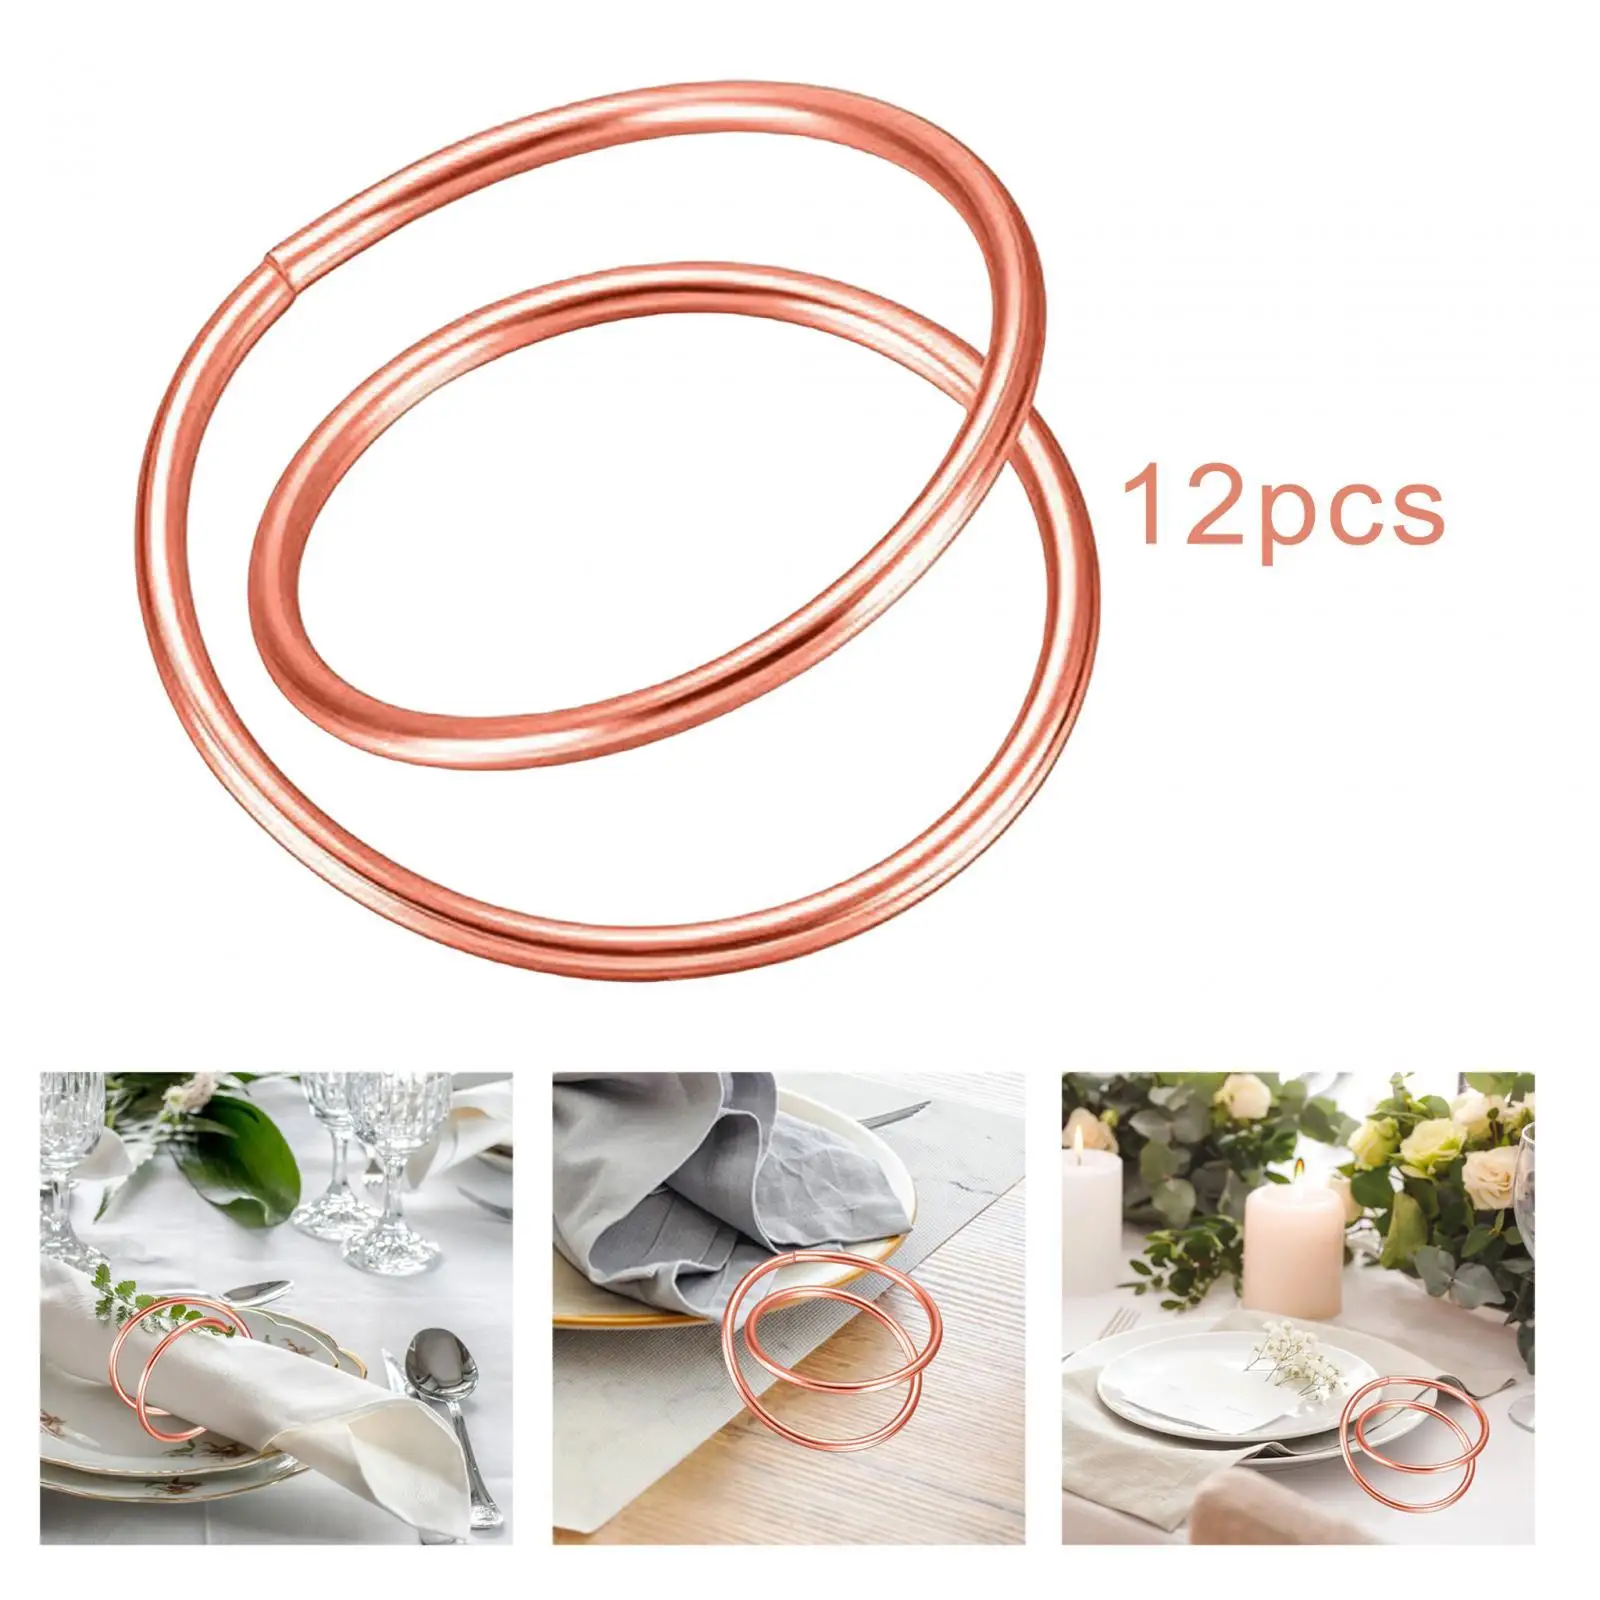 12 Pieces Napkin Rings Banquet Delicate Reception Decoration Cafe Tablecloth Accessories Halloween Parties Wedding Napkin Holder